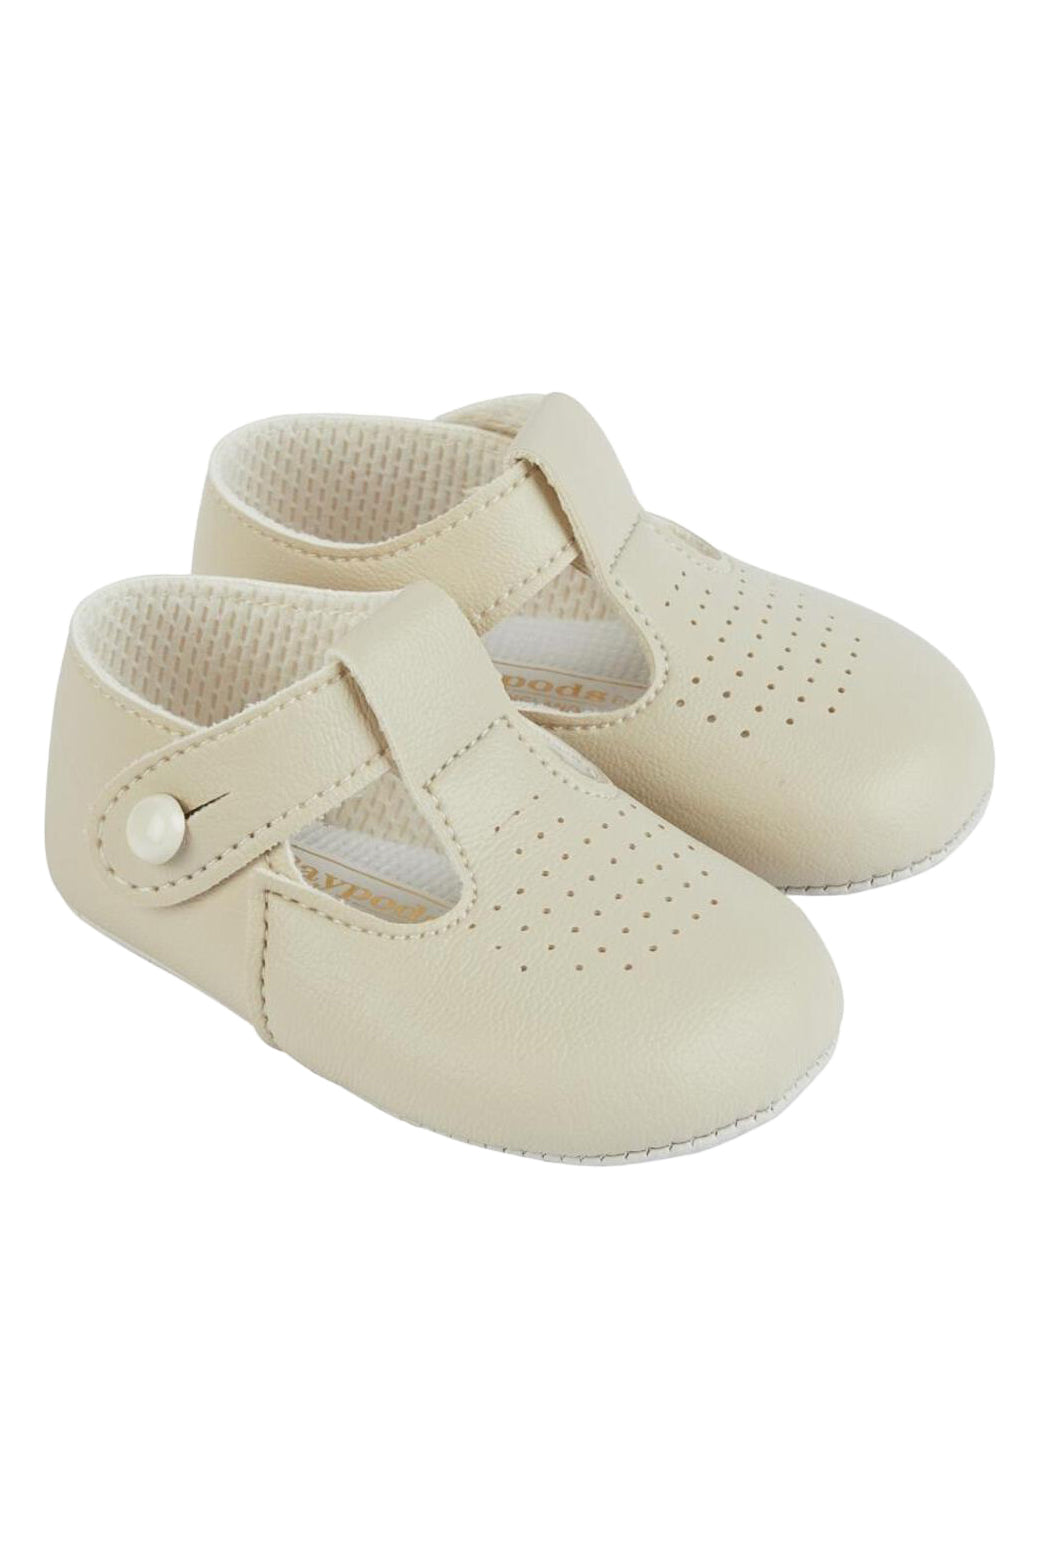 Baypods Biscuit T-Bar Soft Sole Shoes | Millie and John